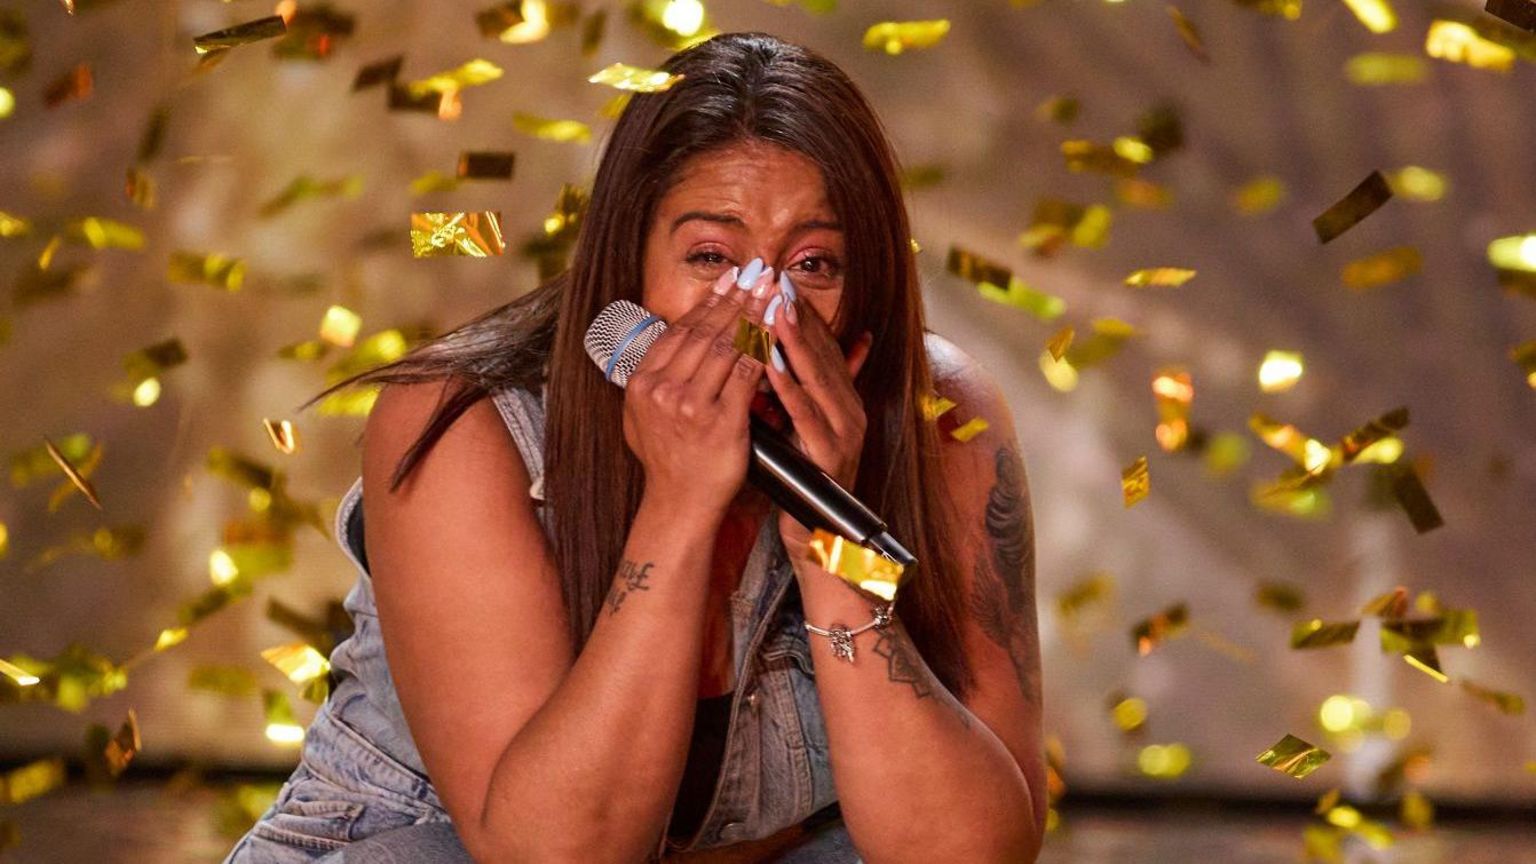 Taryn Charles holds her microphone on Britain's Got Talent and is surrounded by golden confetti